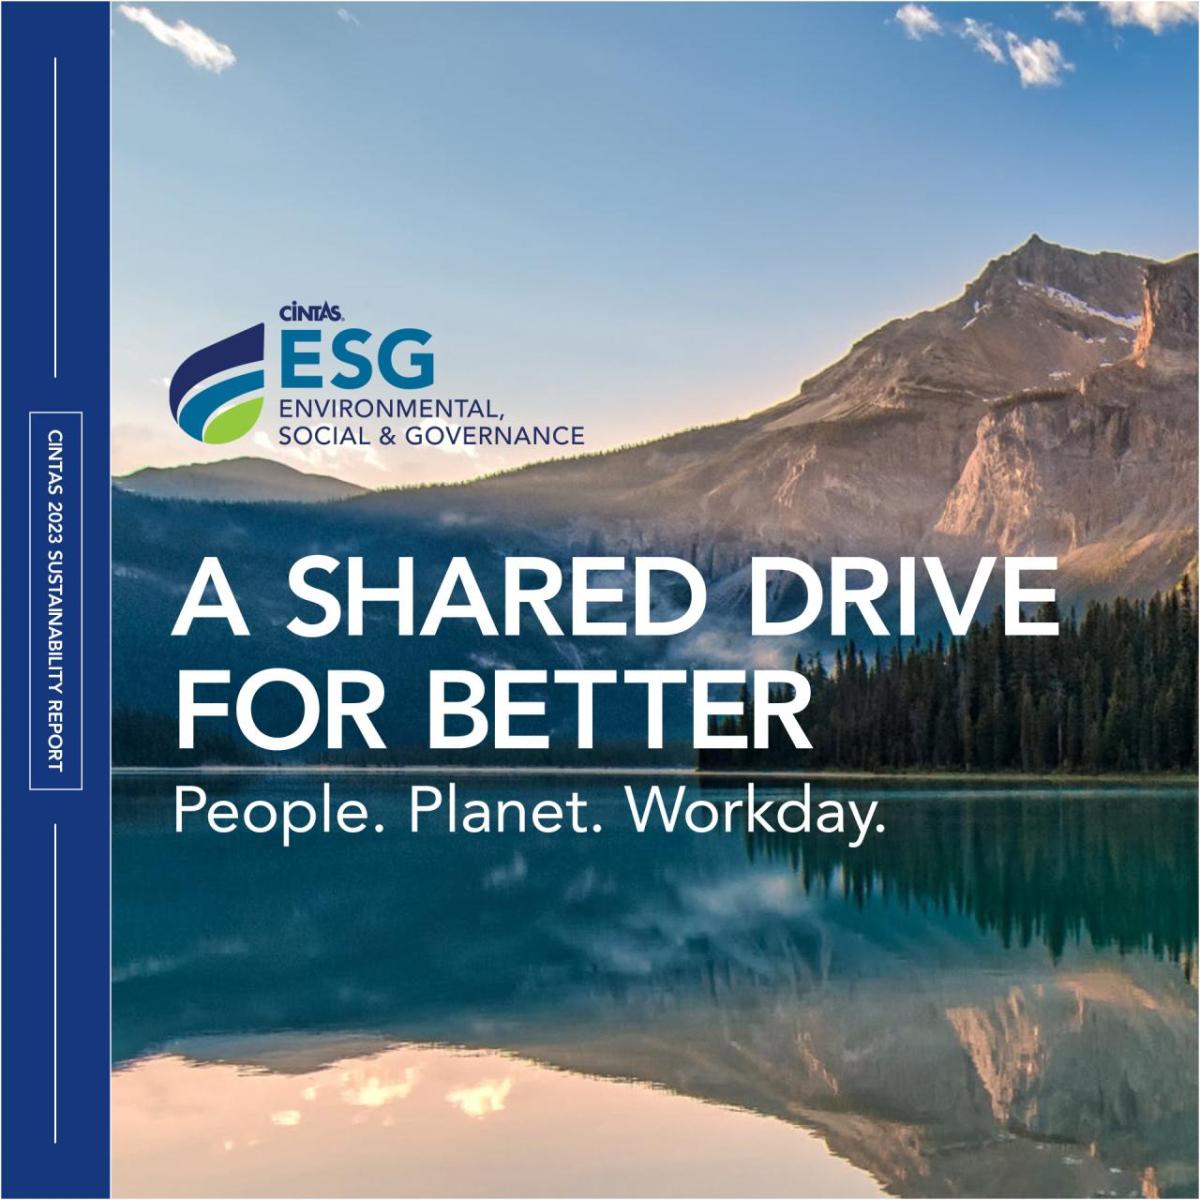 Cintas ESG Report Cover:  A Shared Drive for Better. People. Planet. Workday.